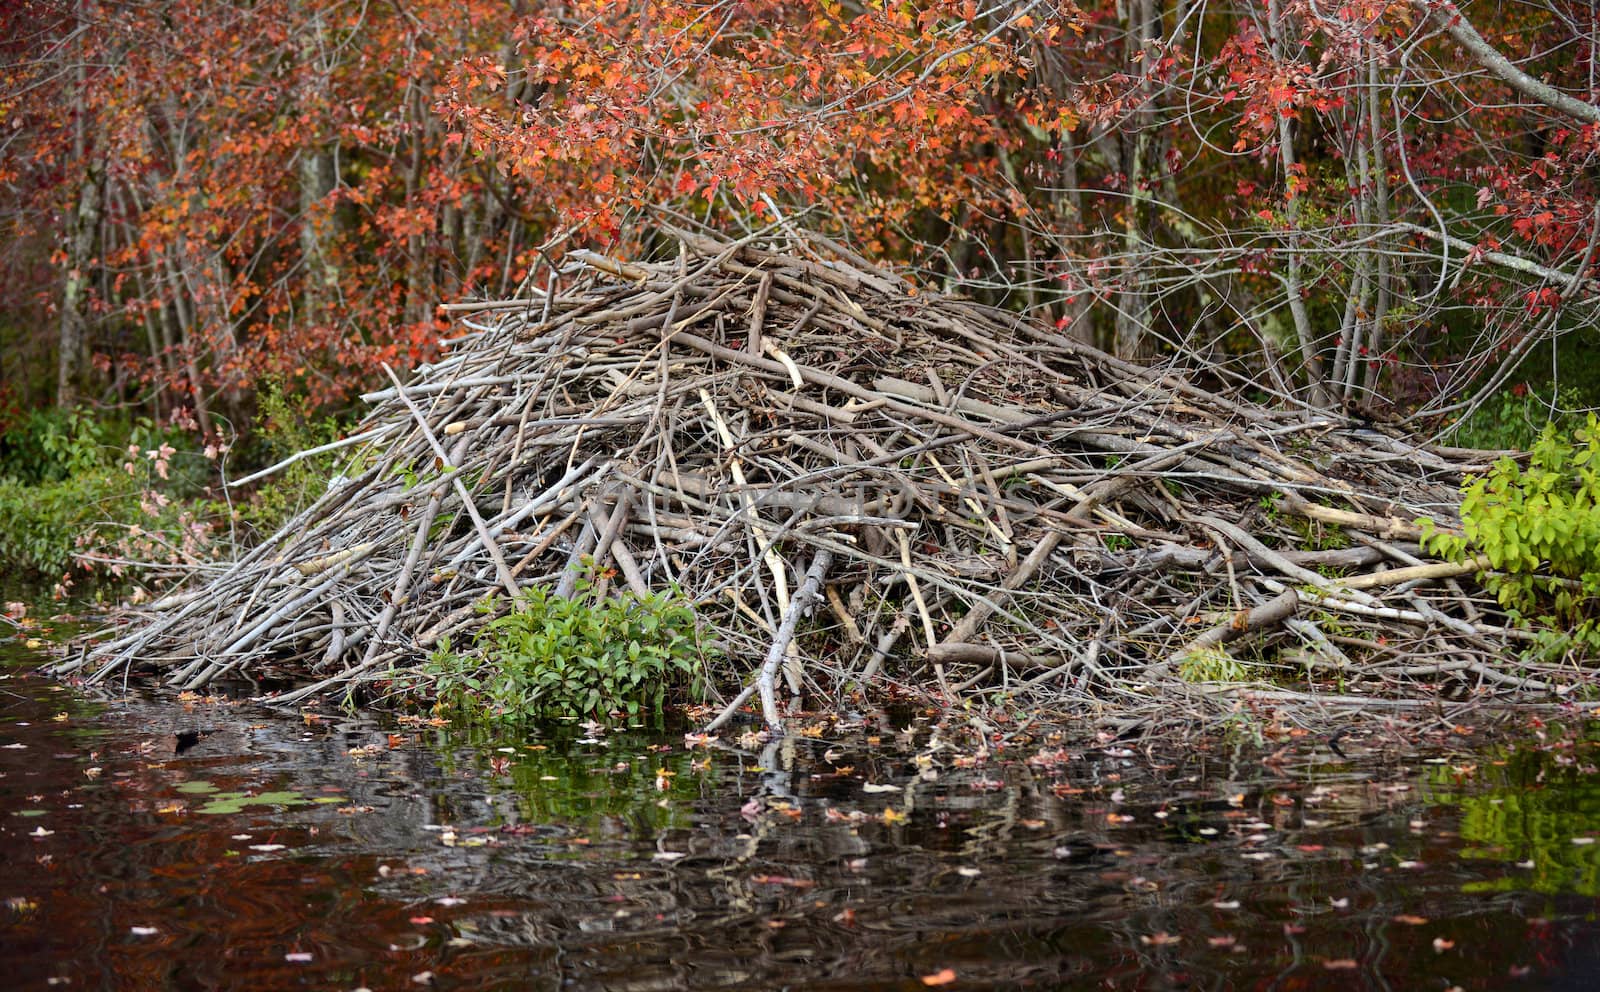 beaver dam in nature in an autumn forest 